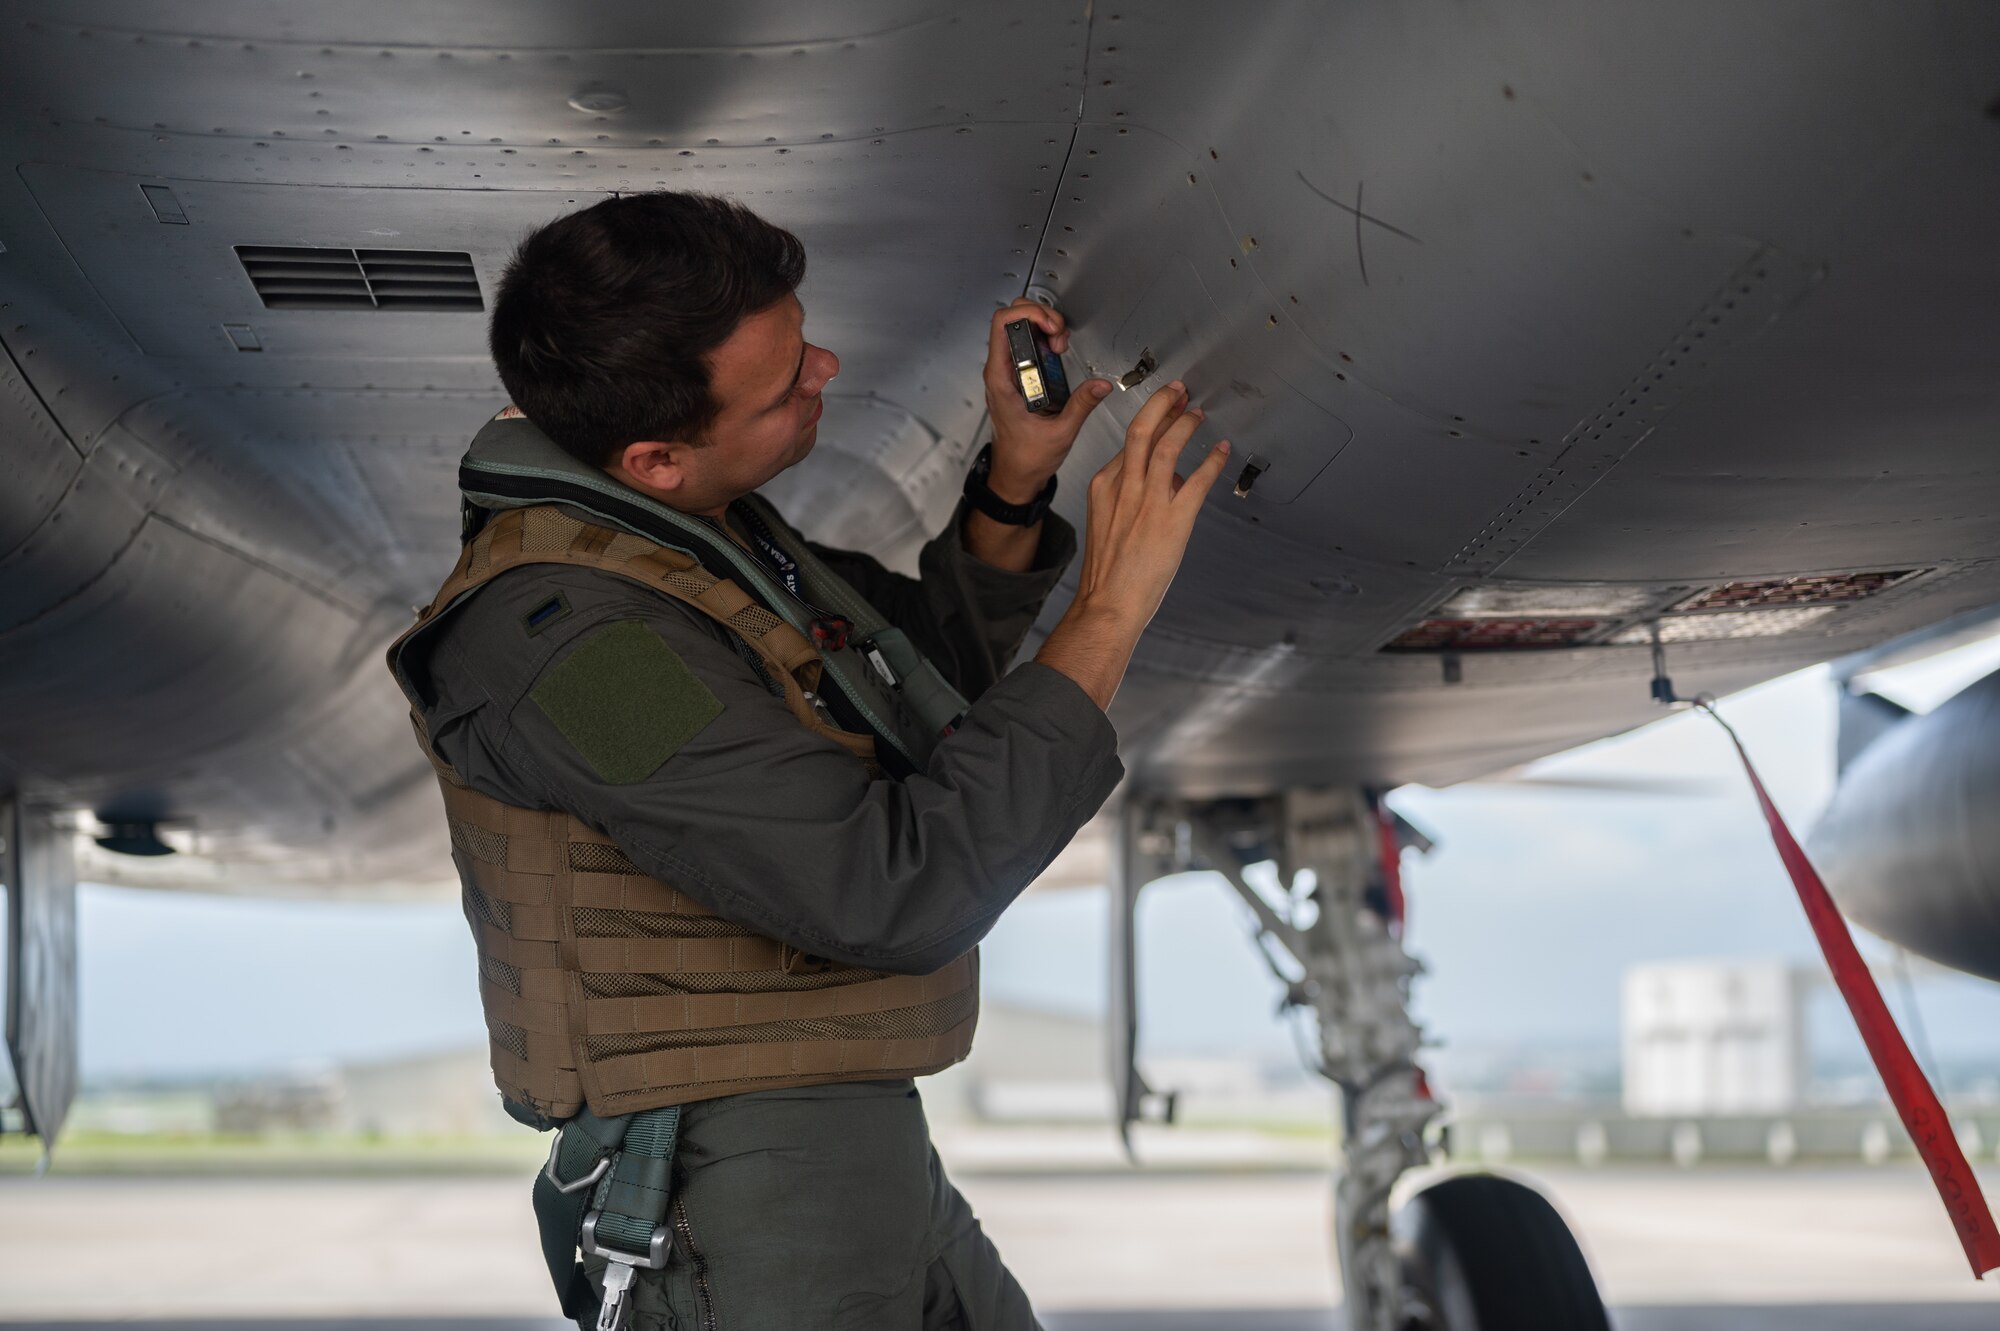 U.S. Air Force 1st Lt. Sebastian Coburn, 44th Fighter Squadron F-15C Eagle pilot, inspects an F-15C Eagle at Kadena Air Base, Japan, Sept. 14, 2021. The F-15C’s superior maneuverability and acceleration are achieved through high engine thrust-to-weight ratio and low wing-loading. (U.S. Air Force photo by Airman 1st Class Stephen Pulter)